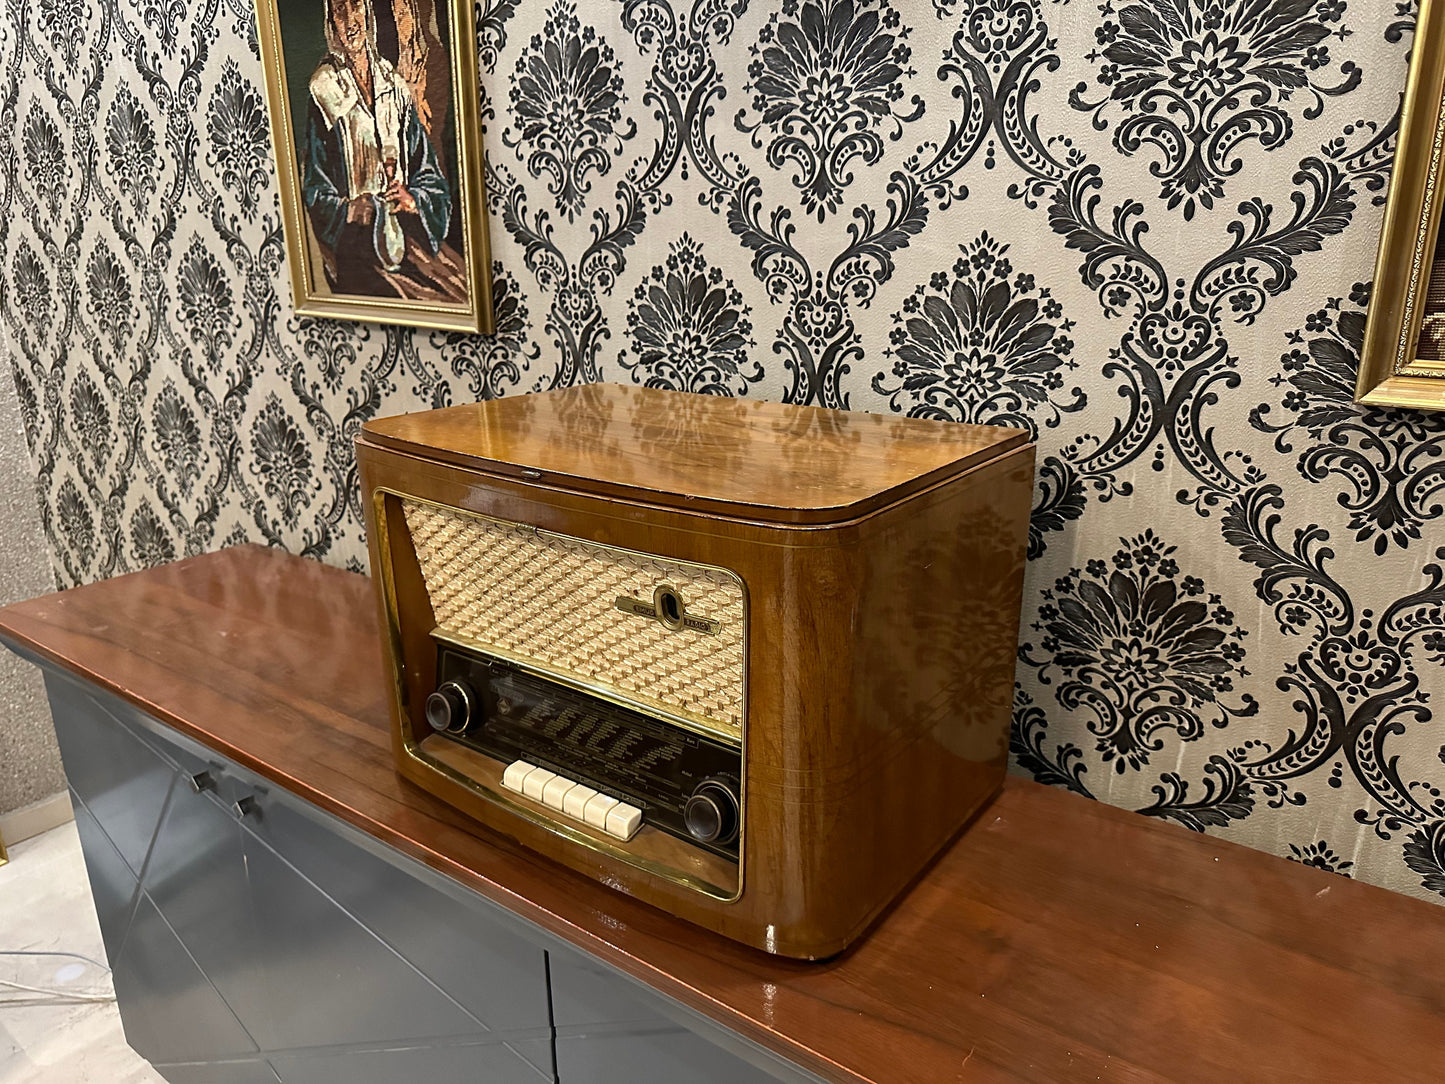 Germany Rekord 225 Lamp Radio With RECORD | Vintage Radio | Orjinal Old Radio | Radio | Lamp Radio